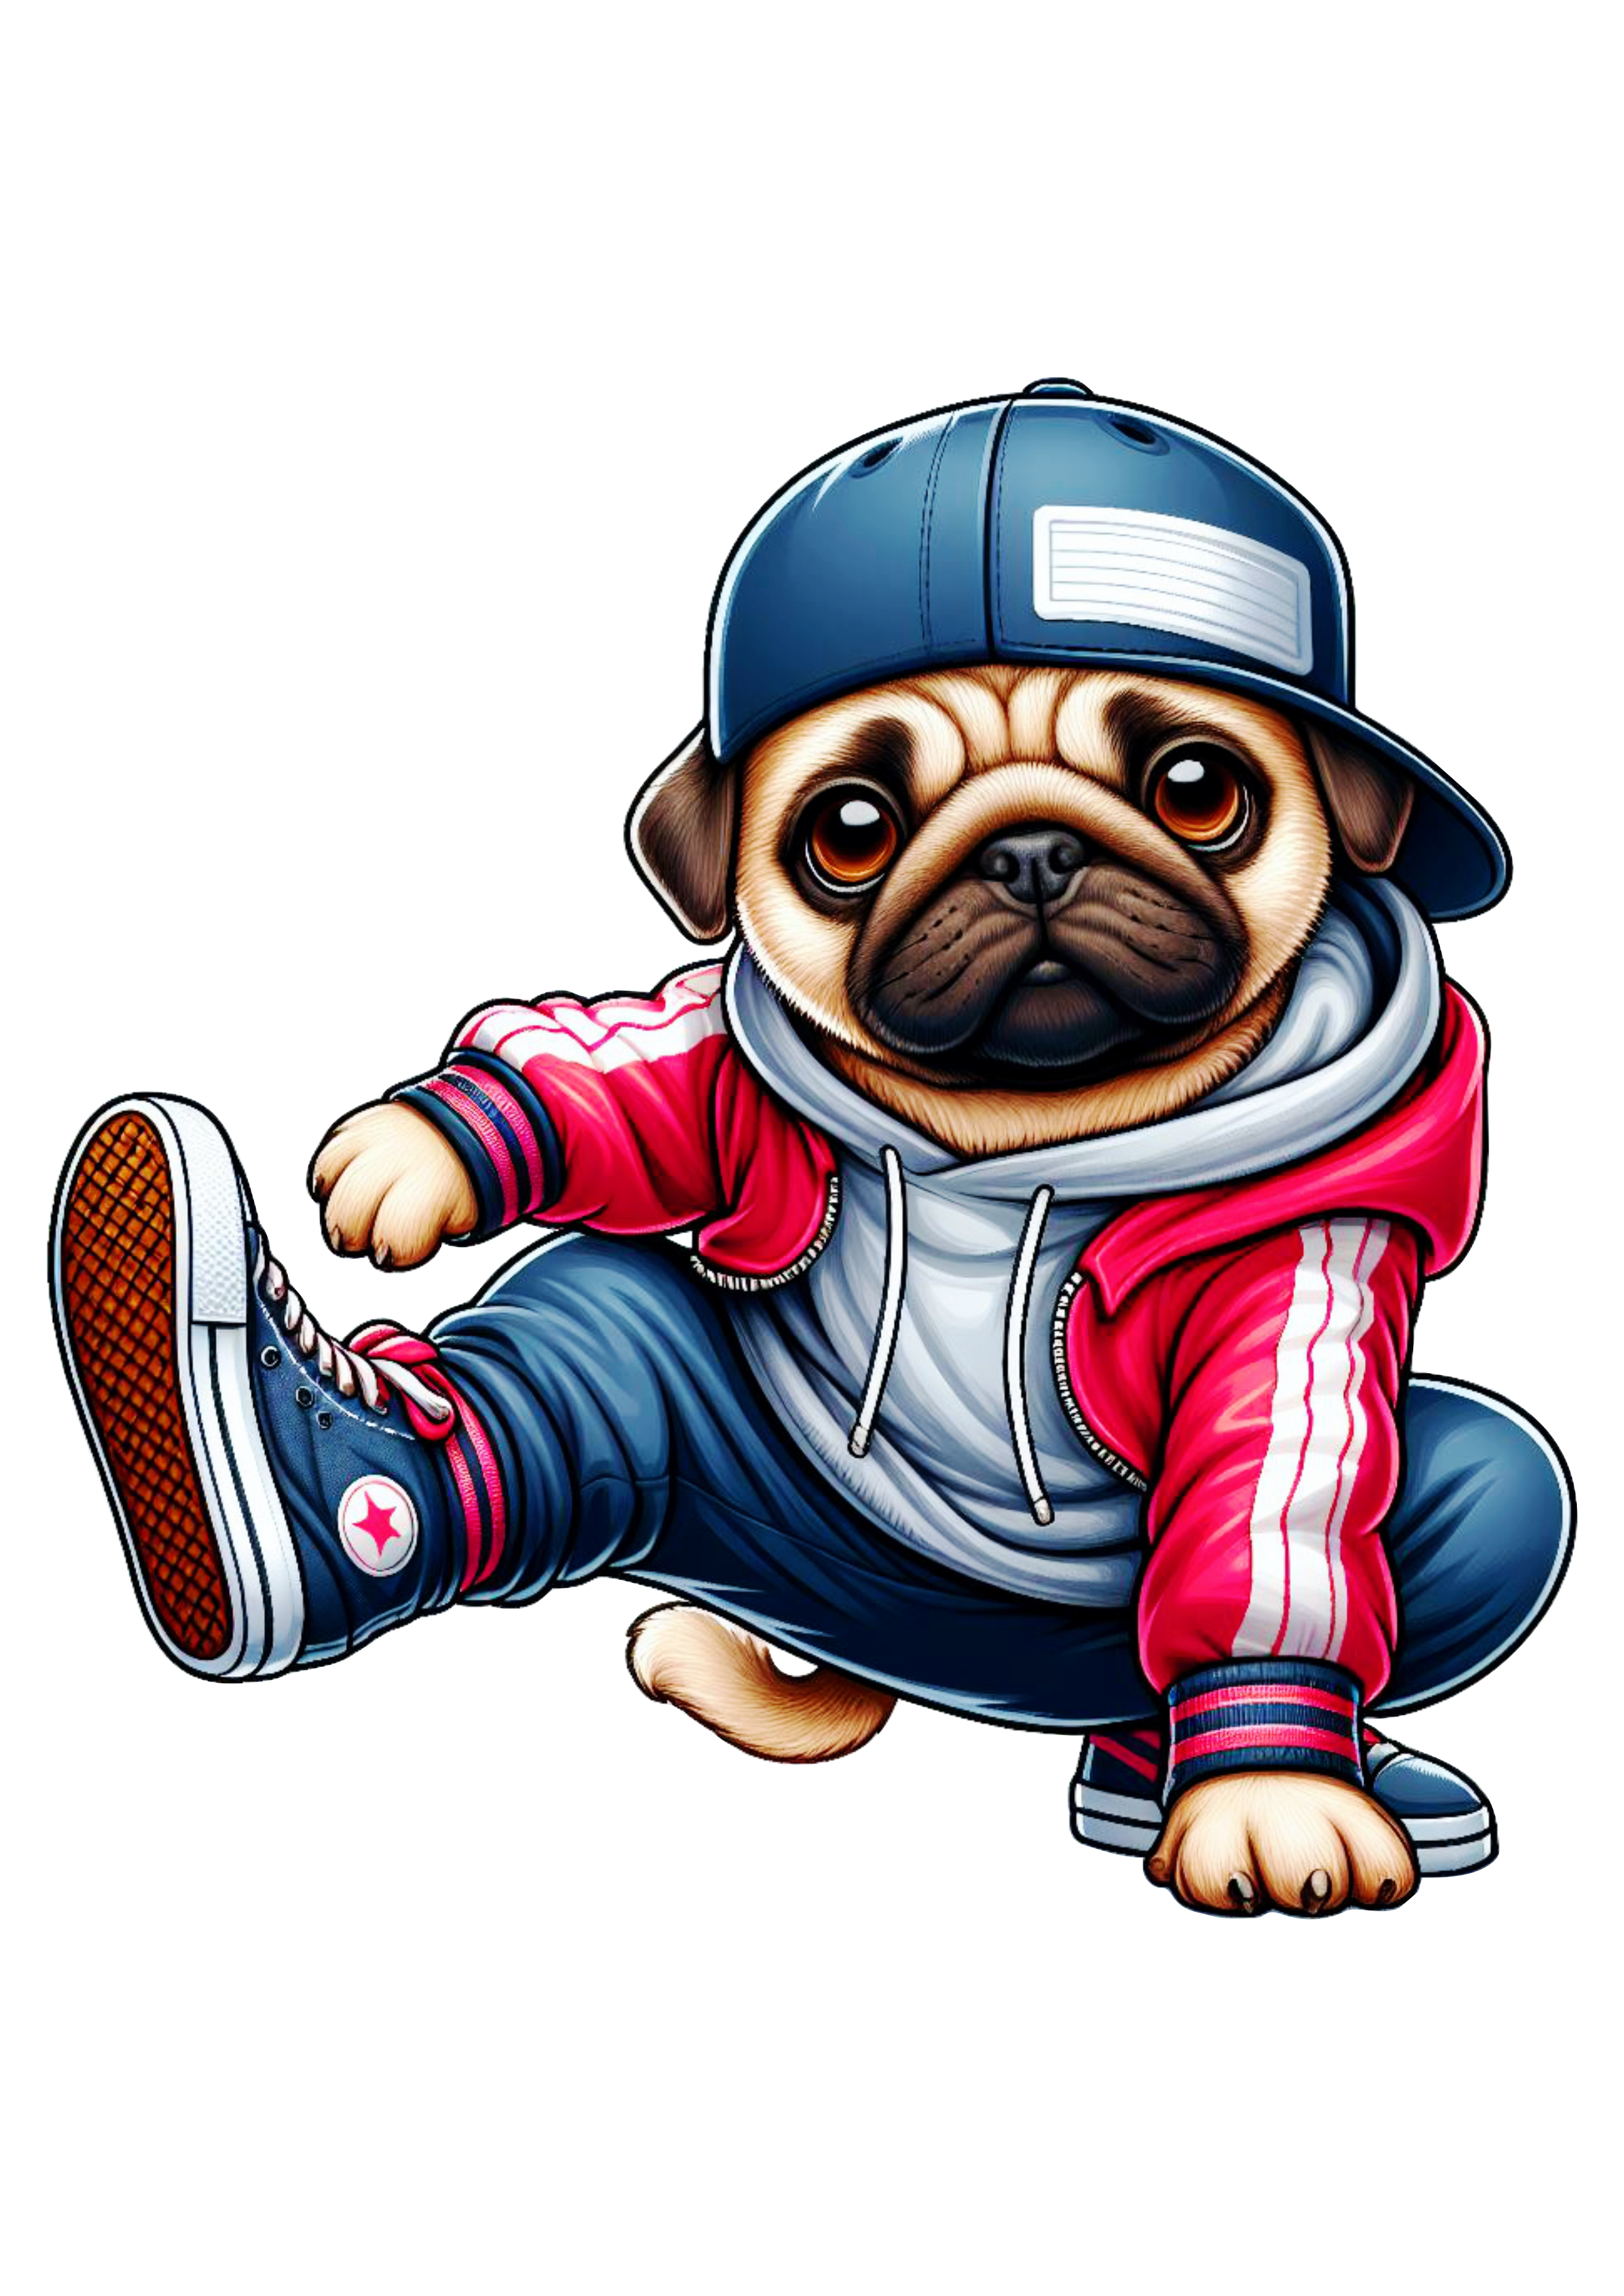 Cute doggo png pug dancing Breakdance transparent background clipart